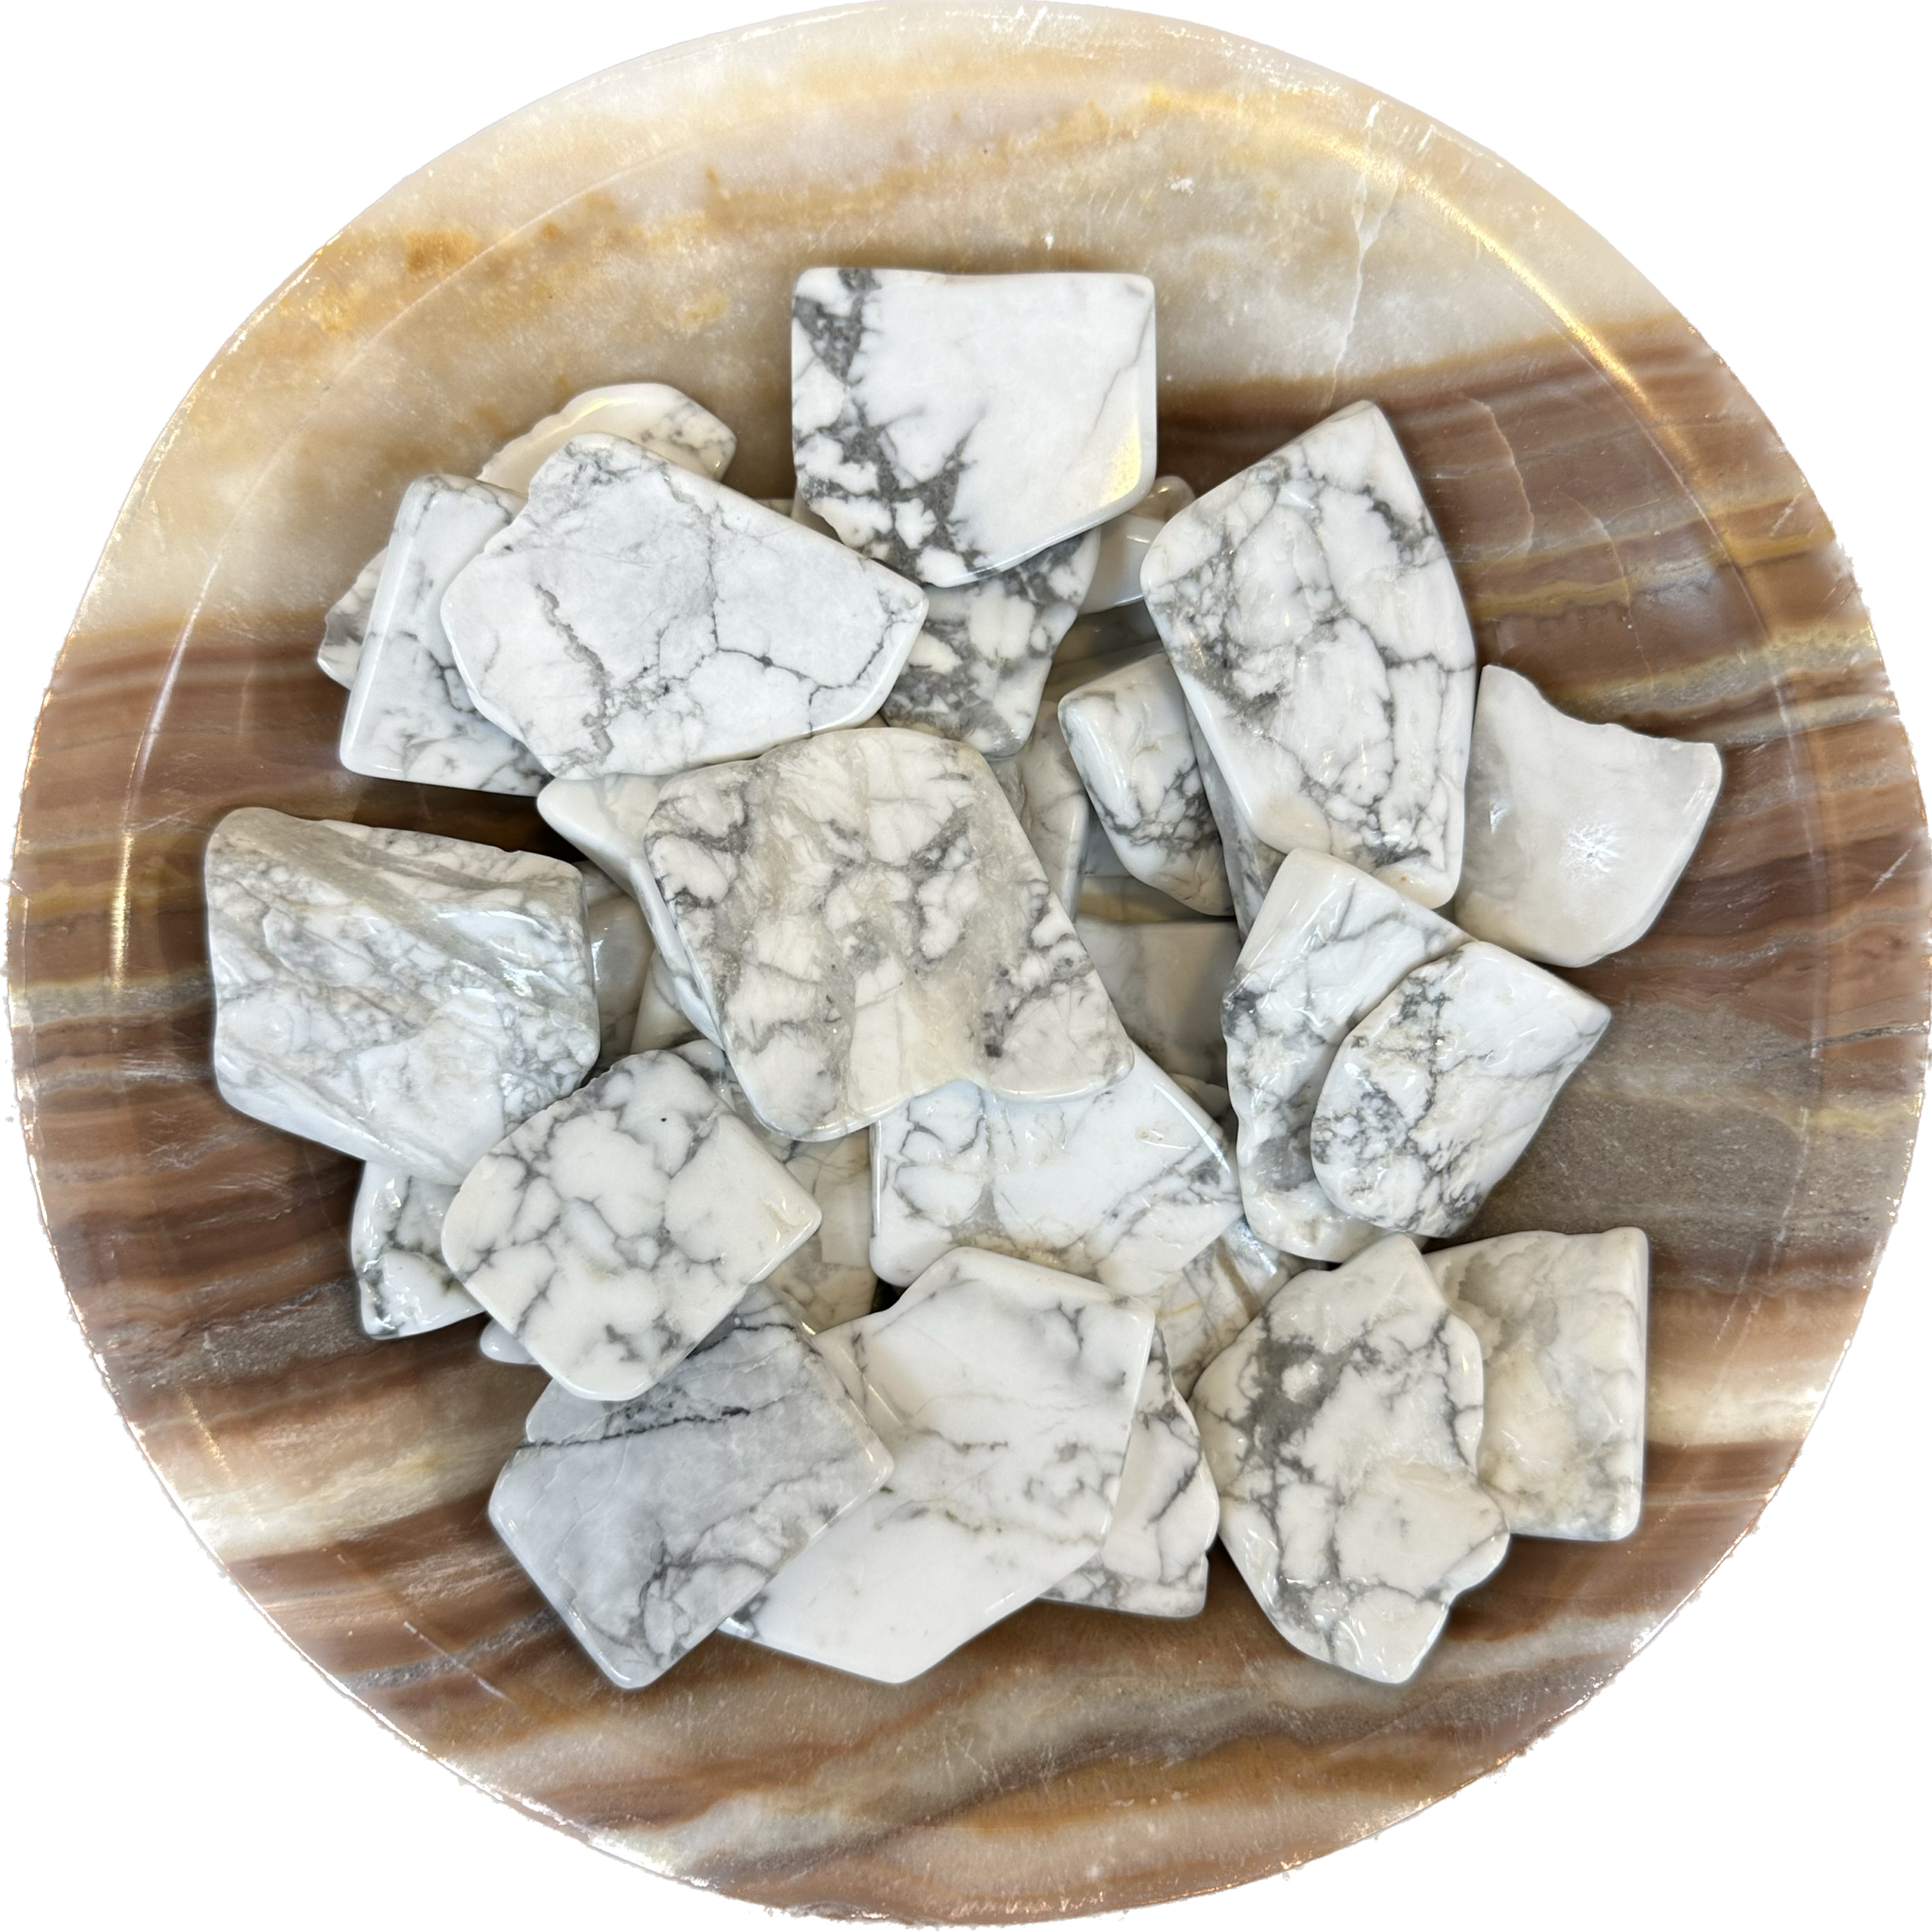 This is a picture of a group of howlite slabs displayed in a bowl made out of aragonite.